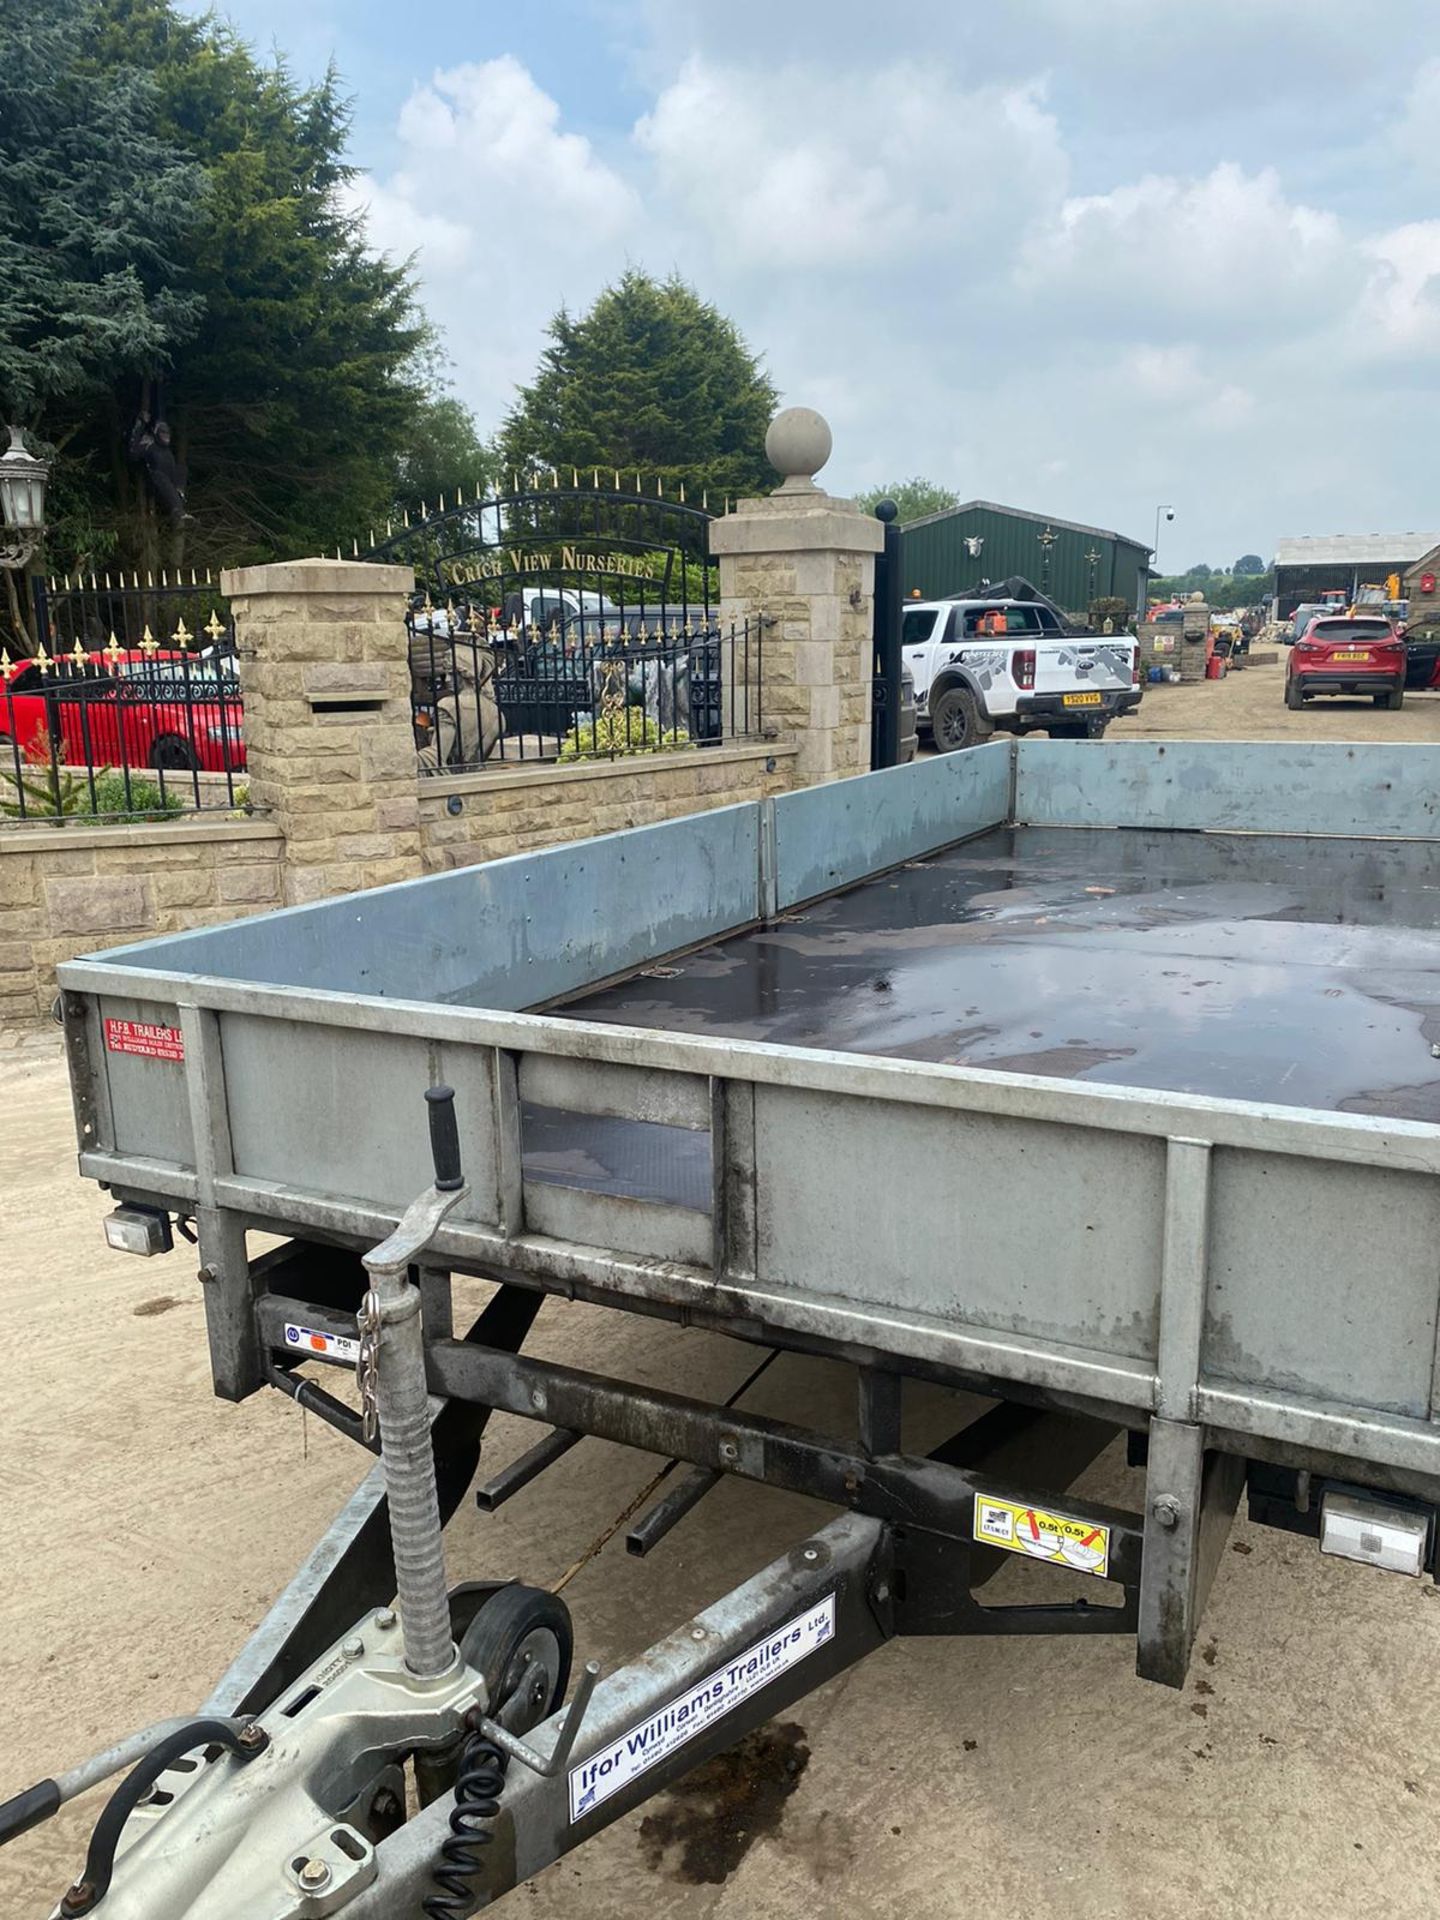 2019 16FT TRI-AXLE IFOR WILLIAMS FLATBED TRAILER, BOUGHT NEW IN JANUARY 2020, GOOD TYRES *NO VAT* - Image 6 of 7